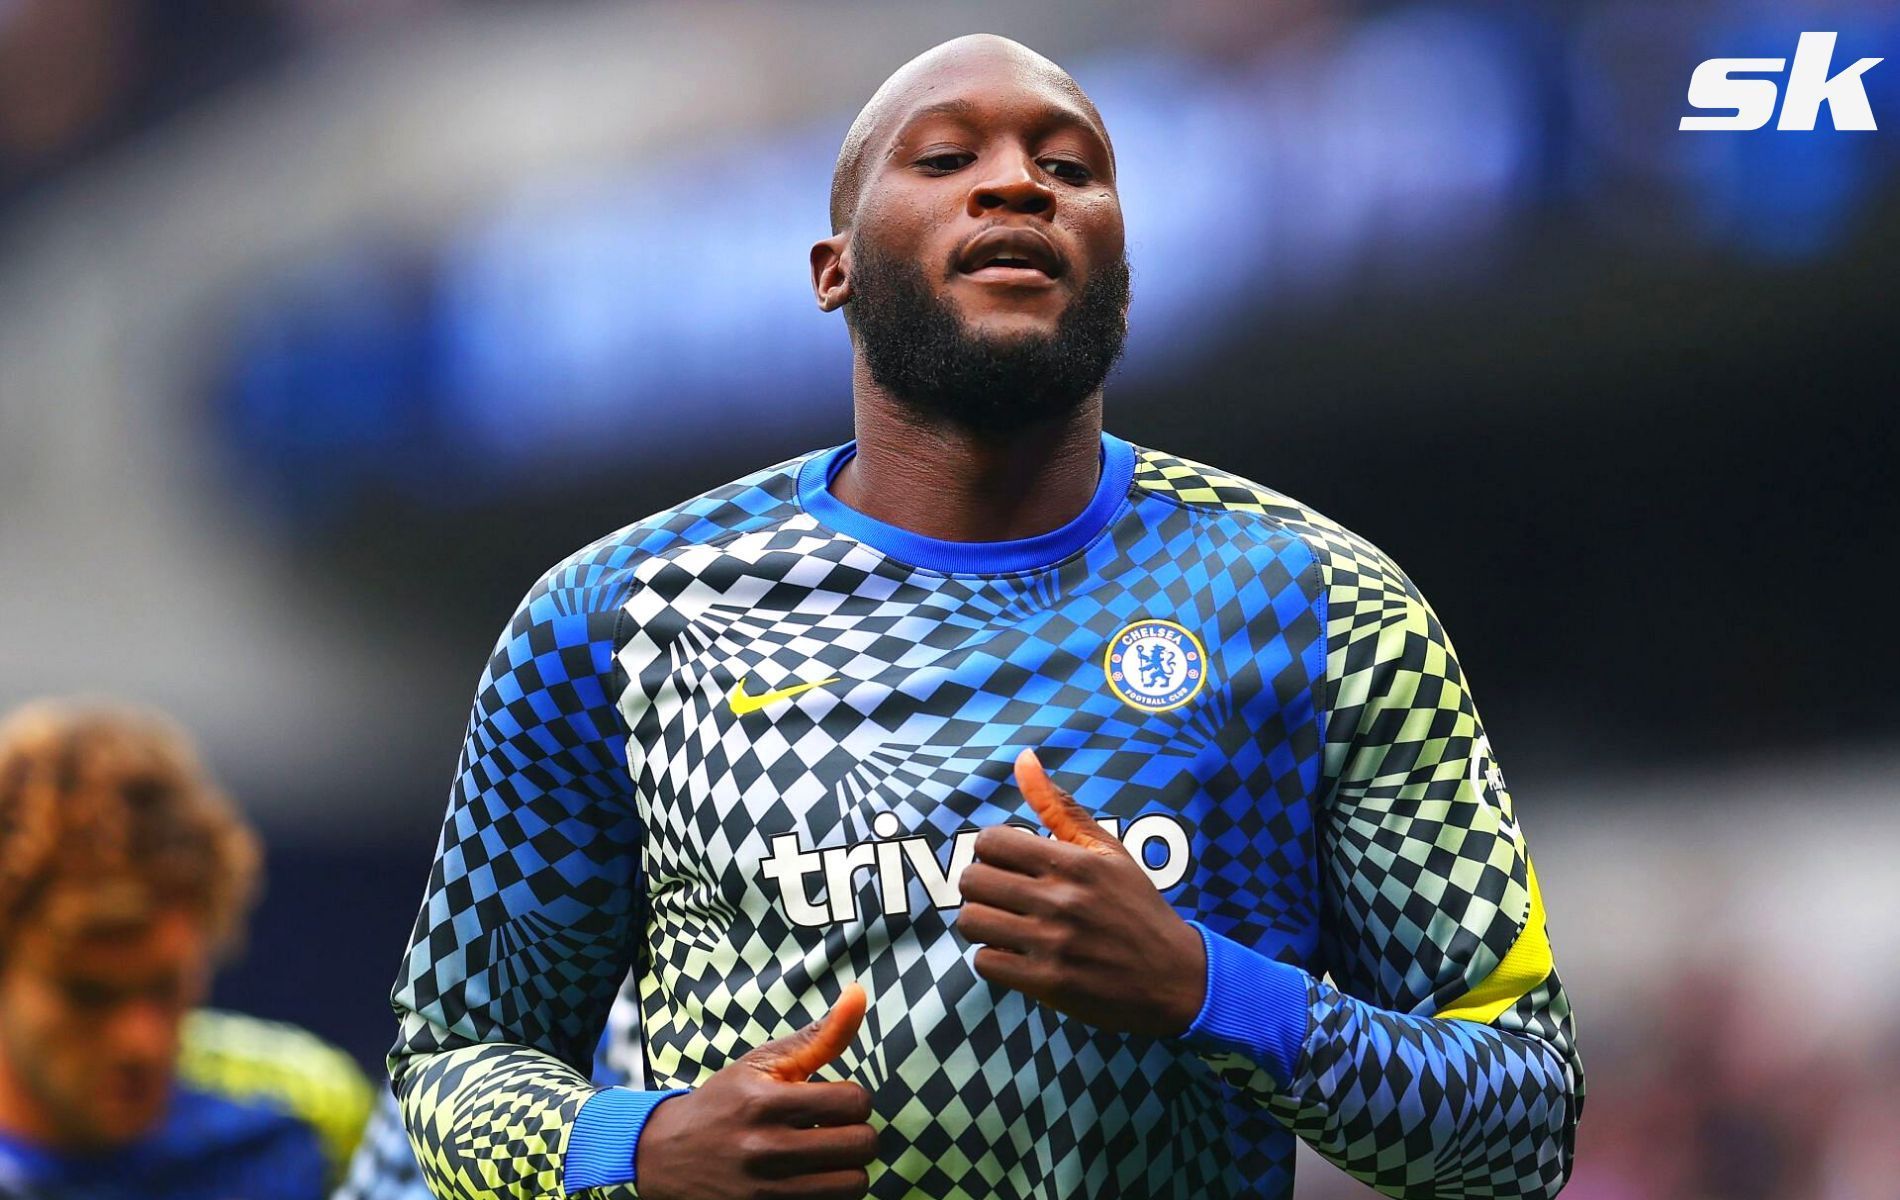 Romelu Lukaku has endured a difficult start to his life in the Premier League following his transfer to Chelsea.